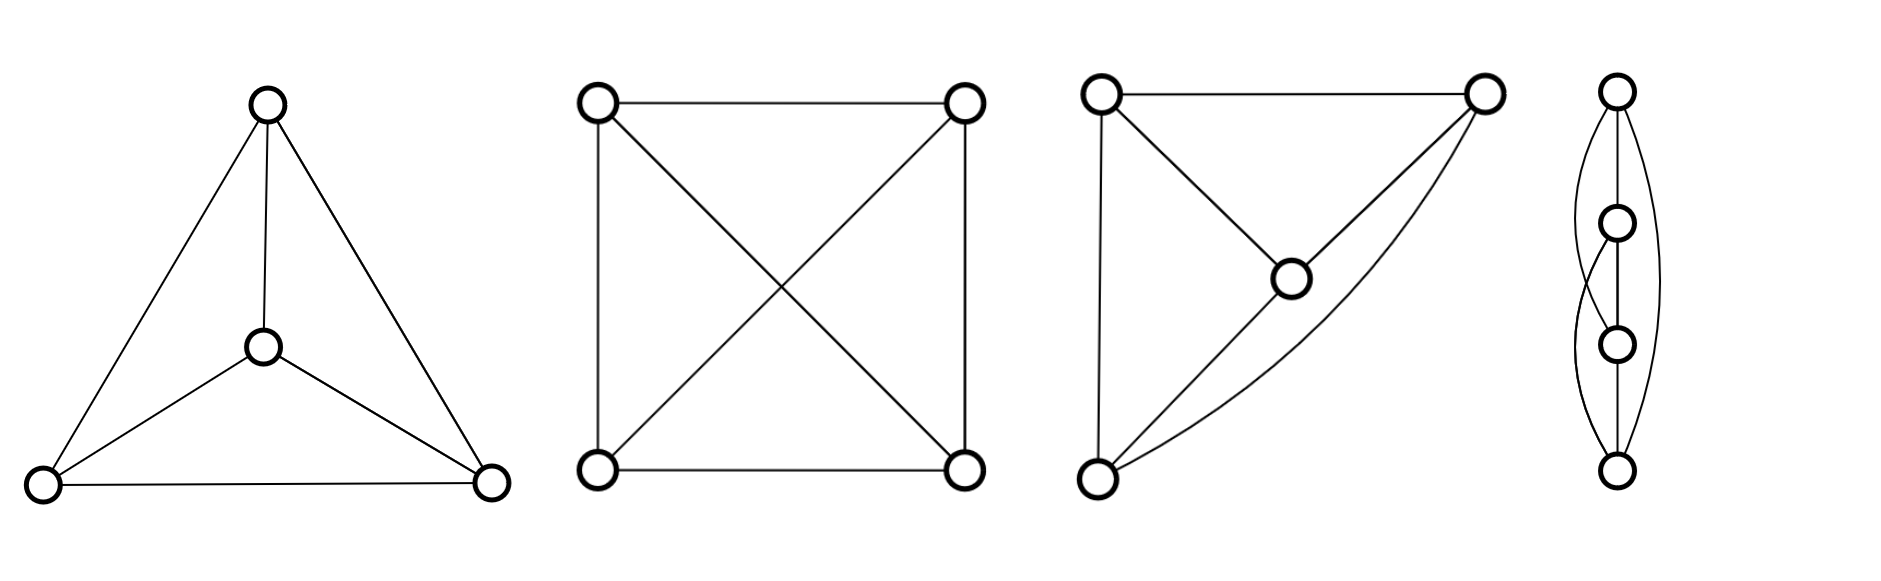 solved problems in graph theory